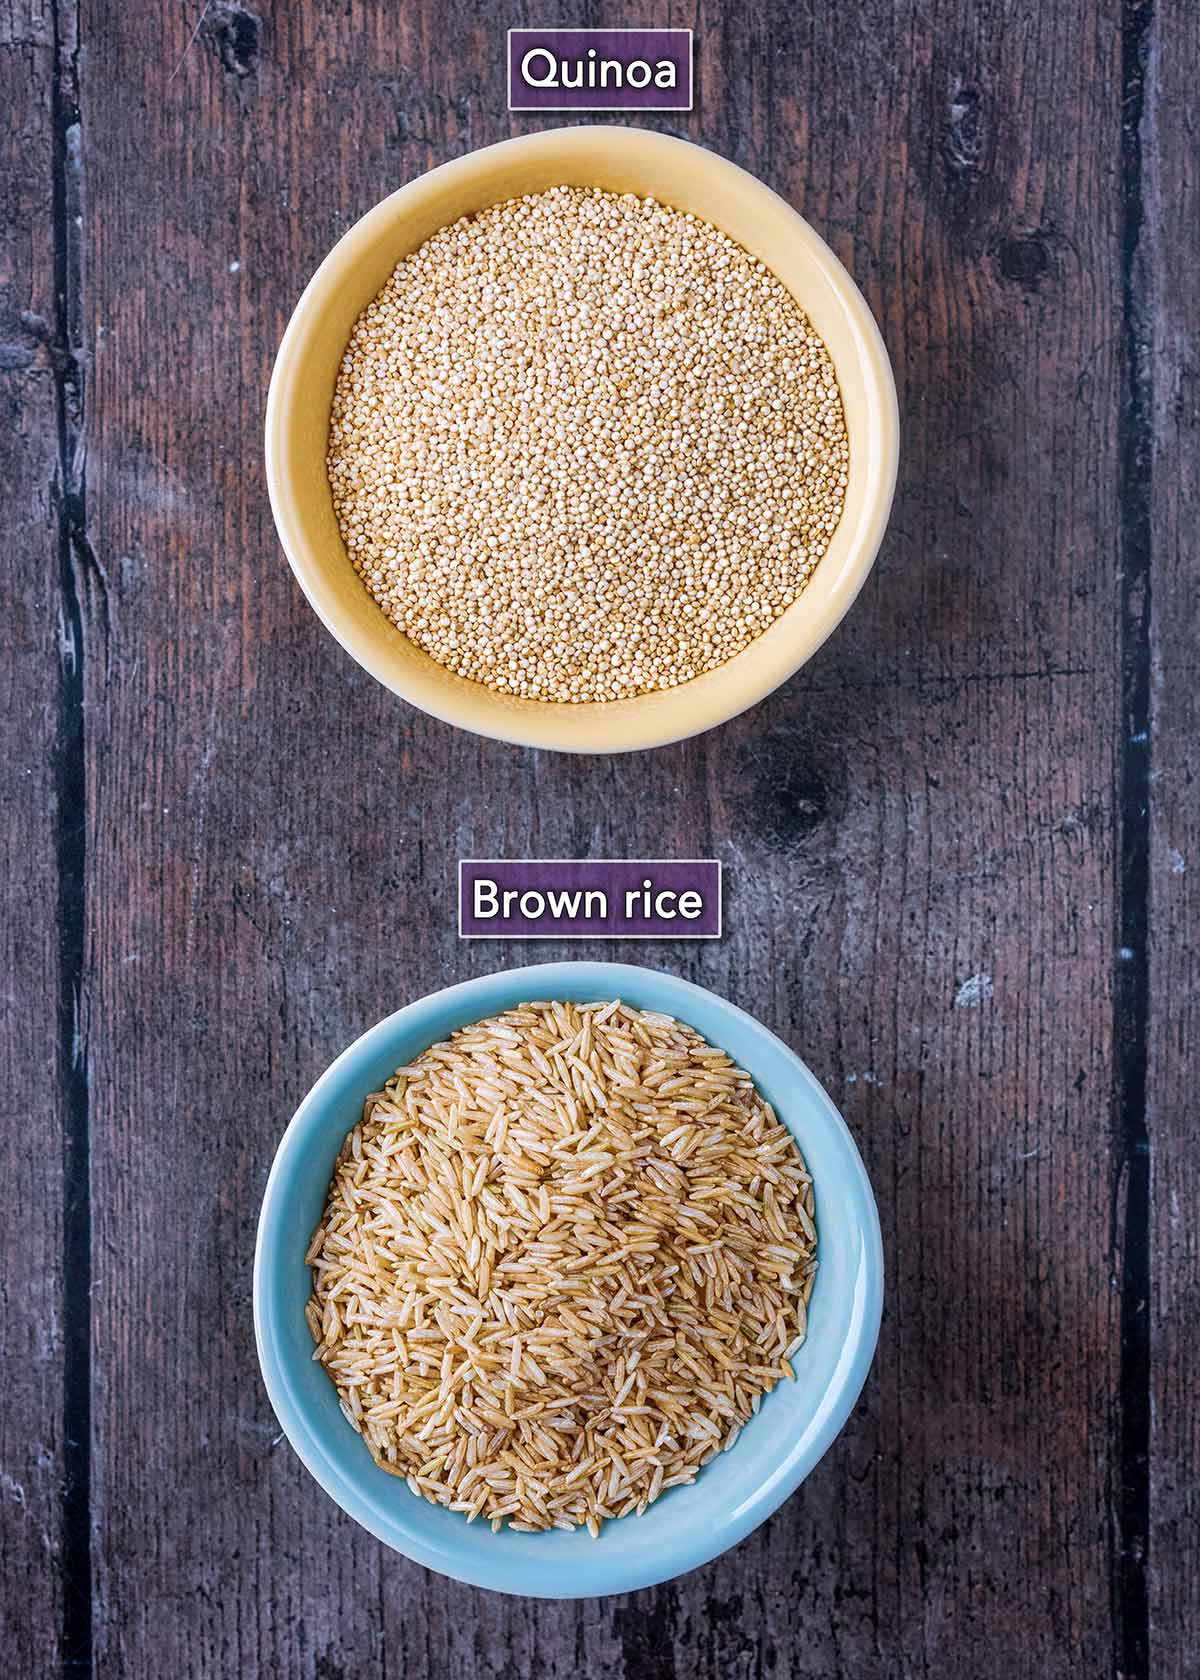 A bowl of uncooked quinoa and a bowl of uncooked brown rice.